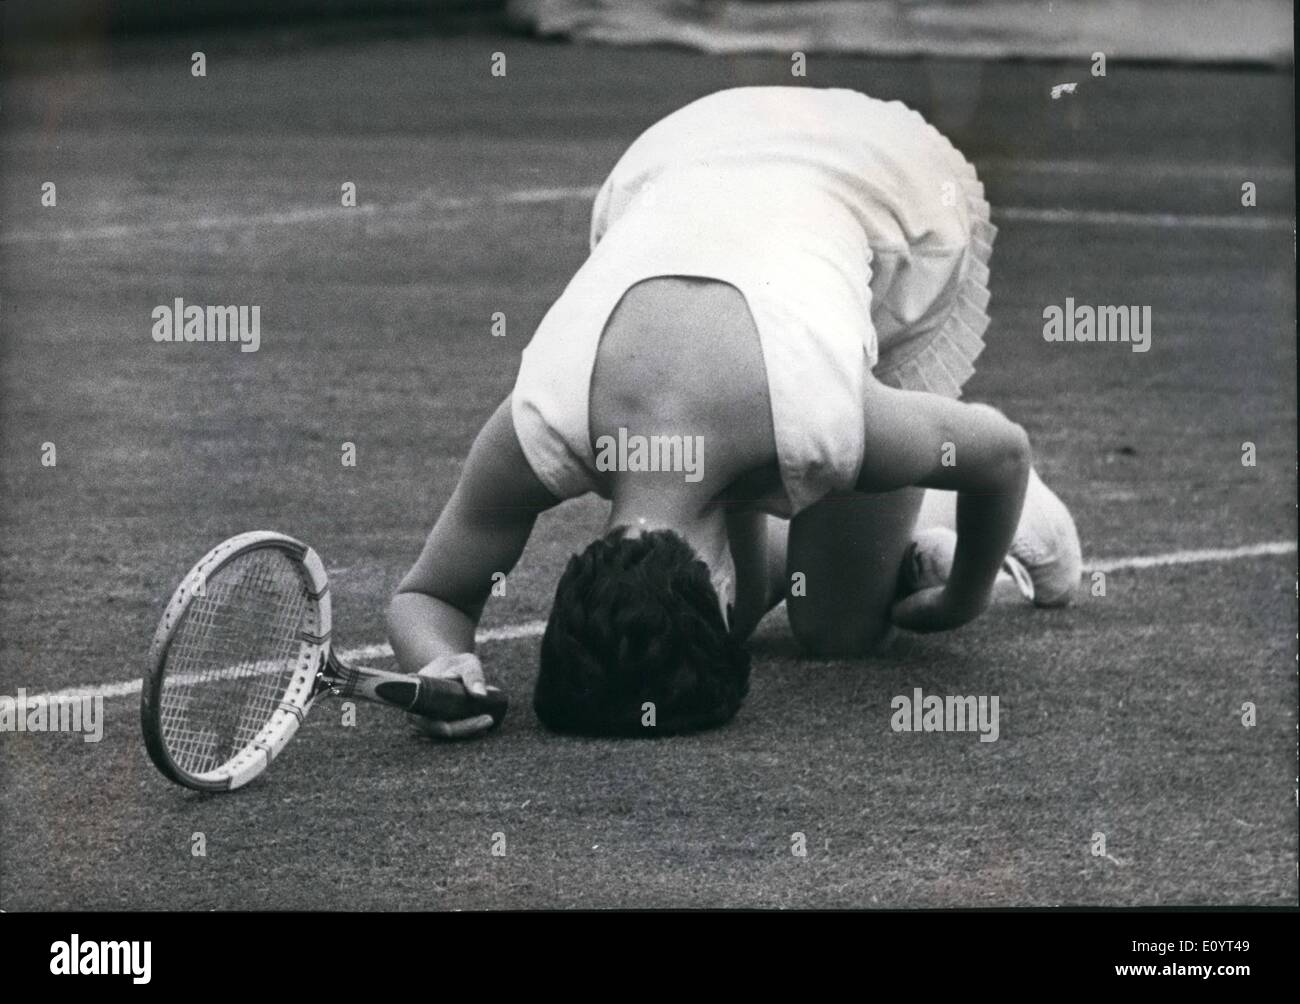 May 05, 1971 - Australian Girl Wins the Women's Singles Final of the Rothman's Surrey Lawn Tennis Championships: Judy Dalton, of Australia, won the Women's singles final of the Rothman's Surrey Lawn Tennis Championships at Surbiton today when she beat Joyce Williams, the British No.4, 9-8, 6-2. Photo shows Joyce Williams buries her head on the court after missing a volley. Stock Photo